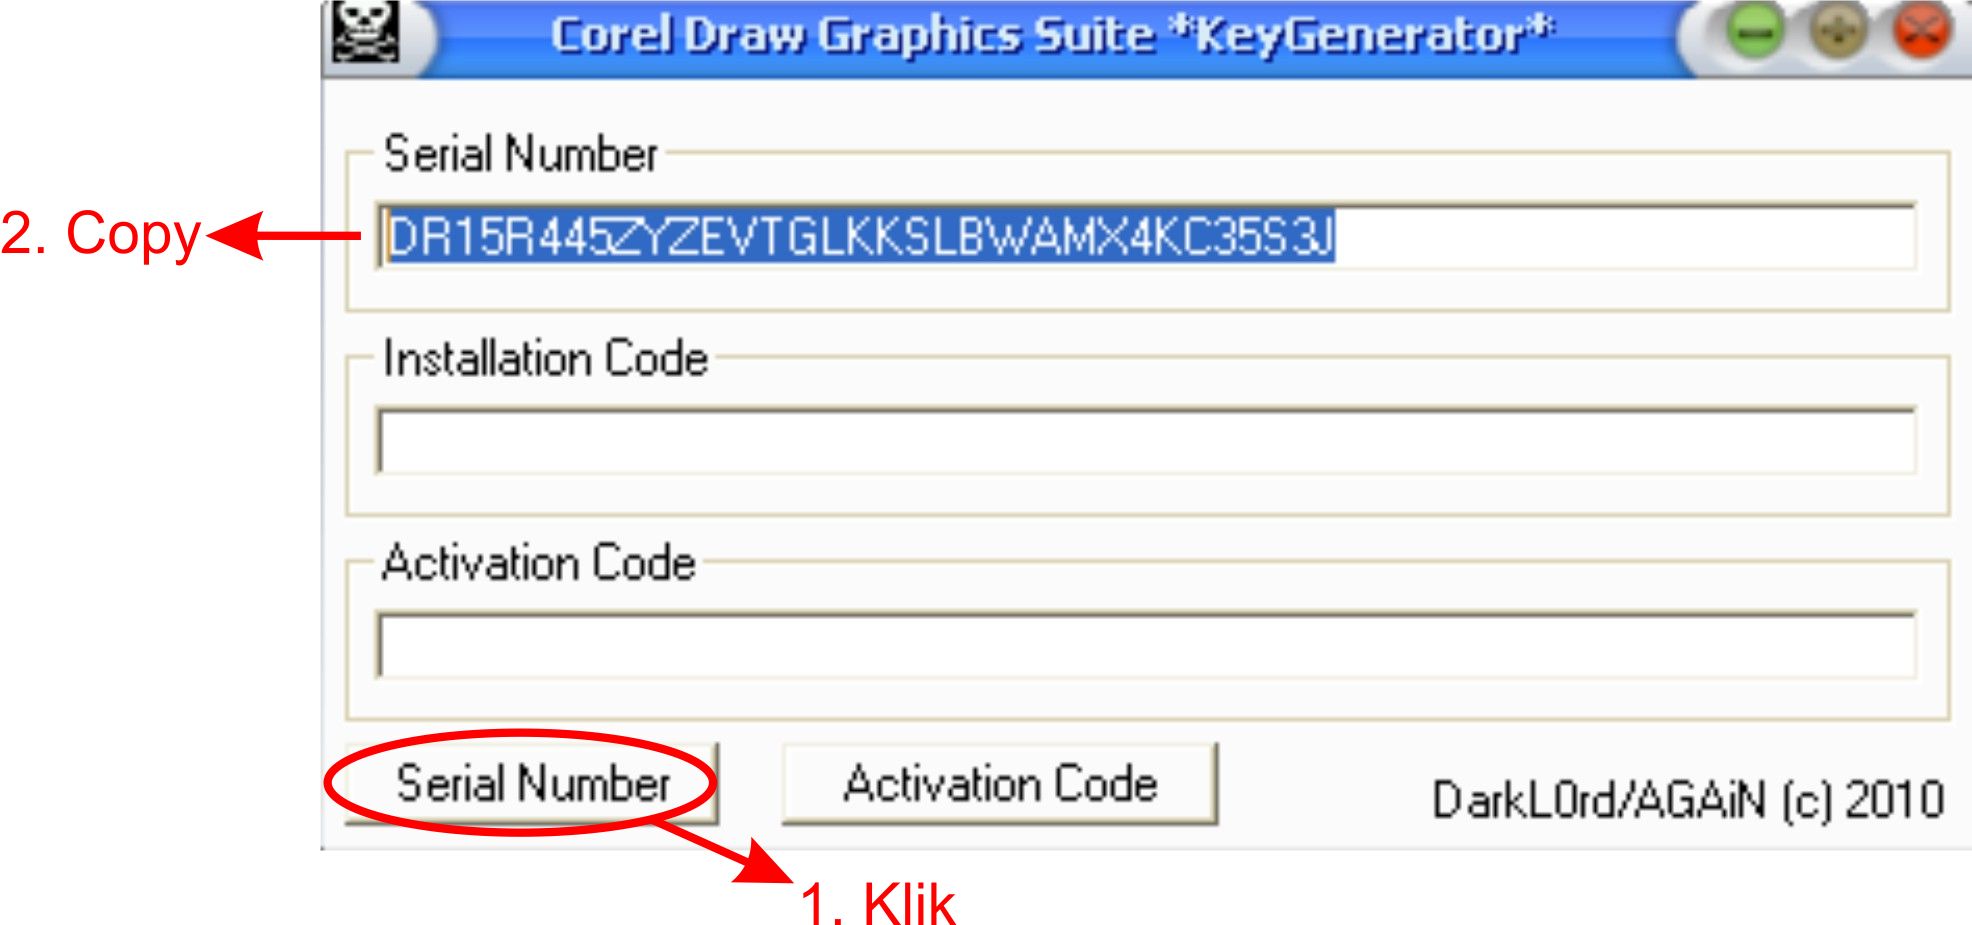 where is my preivous corel draw serial number